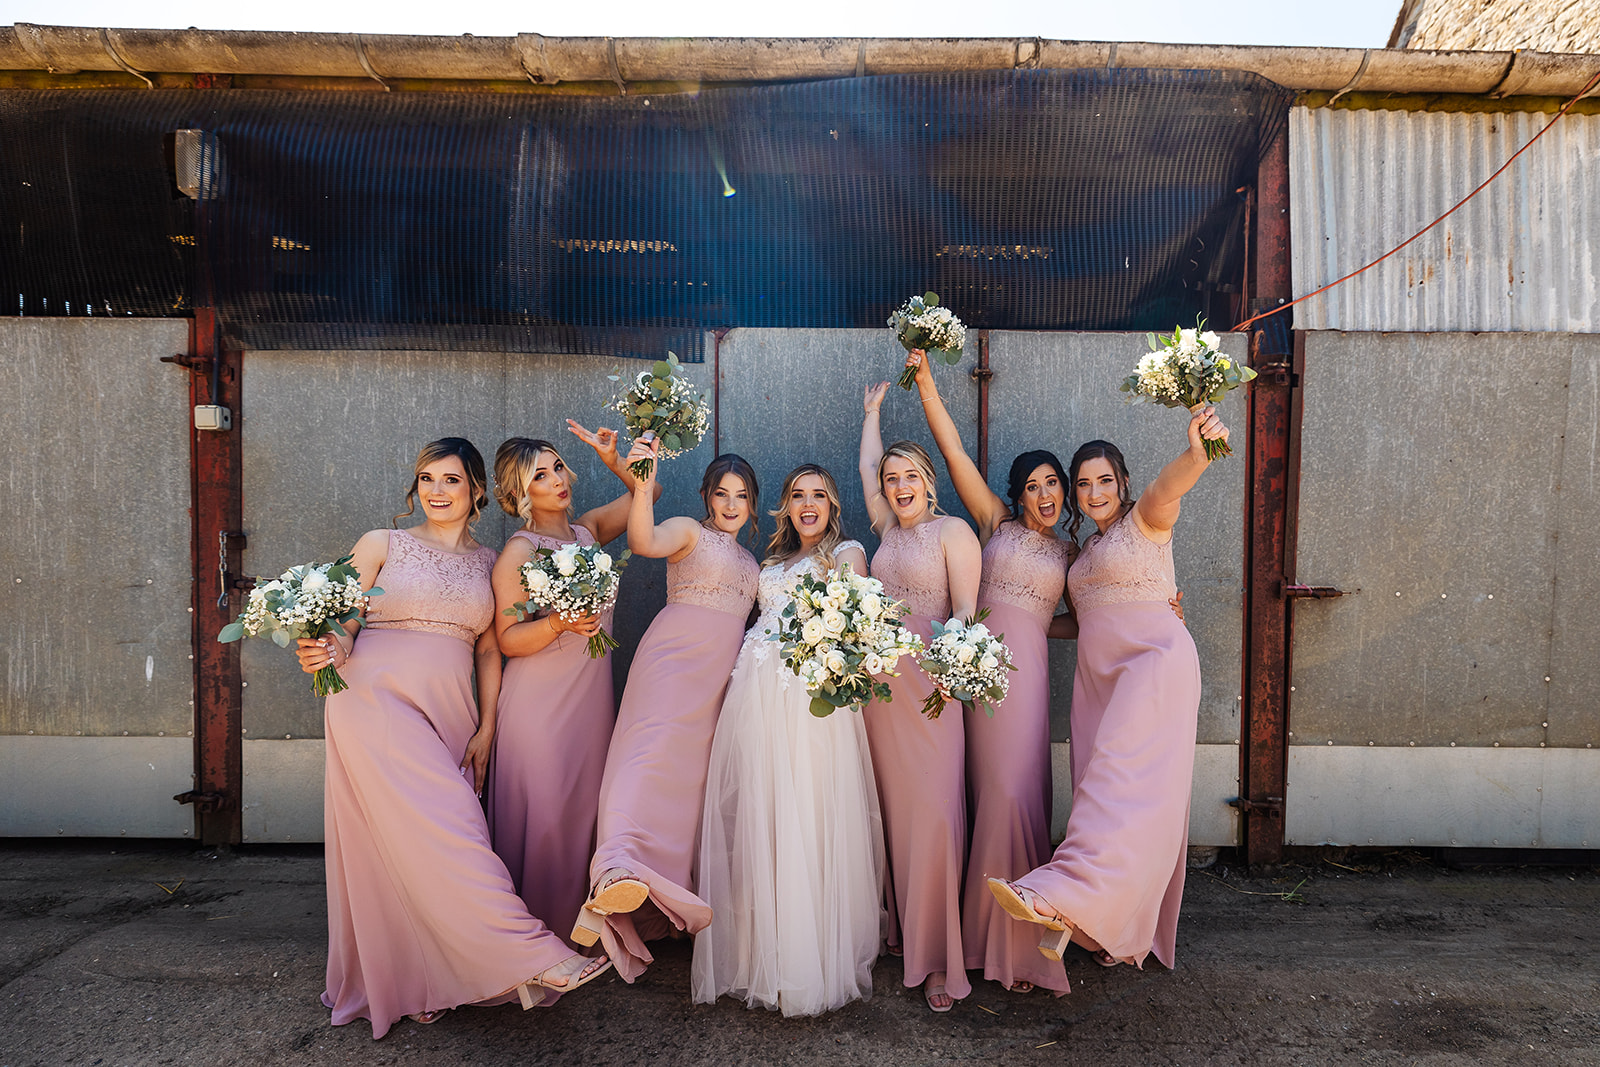 Bride with bridesmaids outside metal barn holding up bouquets 